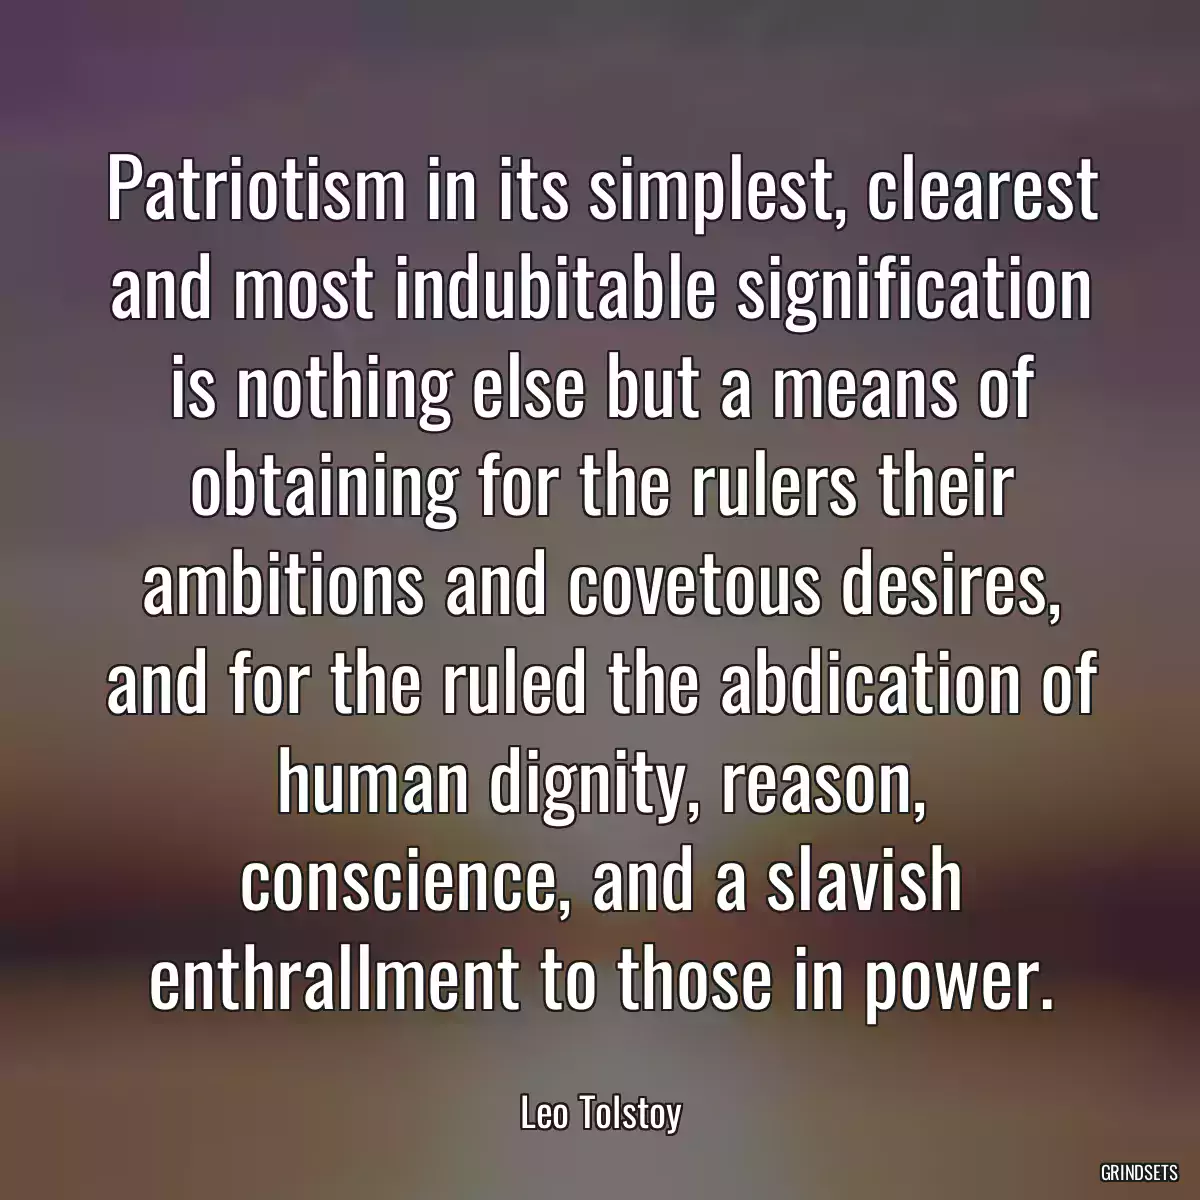 Patriotism in its simplest, clearest and most indubitable signification is nothing else but a means of obtaining for the rulers their ambitions and covetous desires, and for the ruled the abdication of human dignity, reason, conscience, and a slavish enthrallment to those in power.